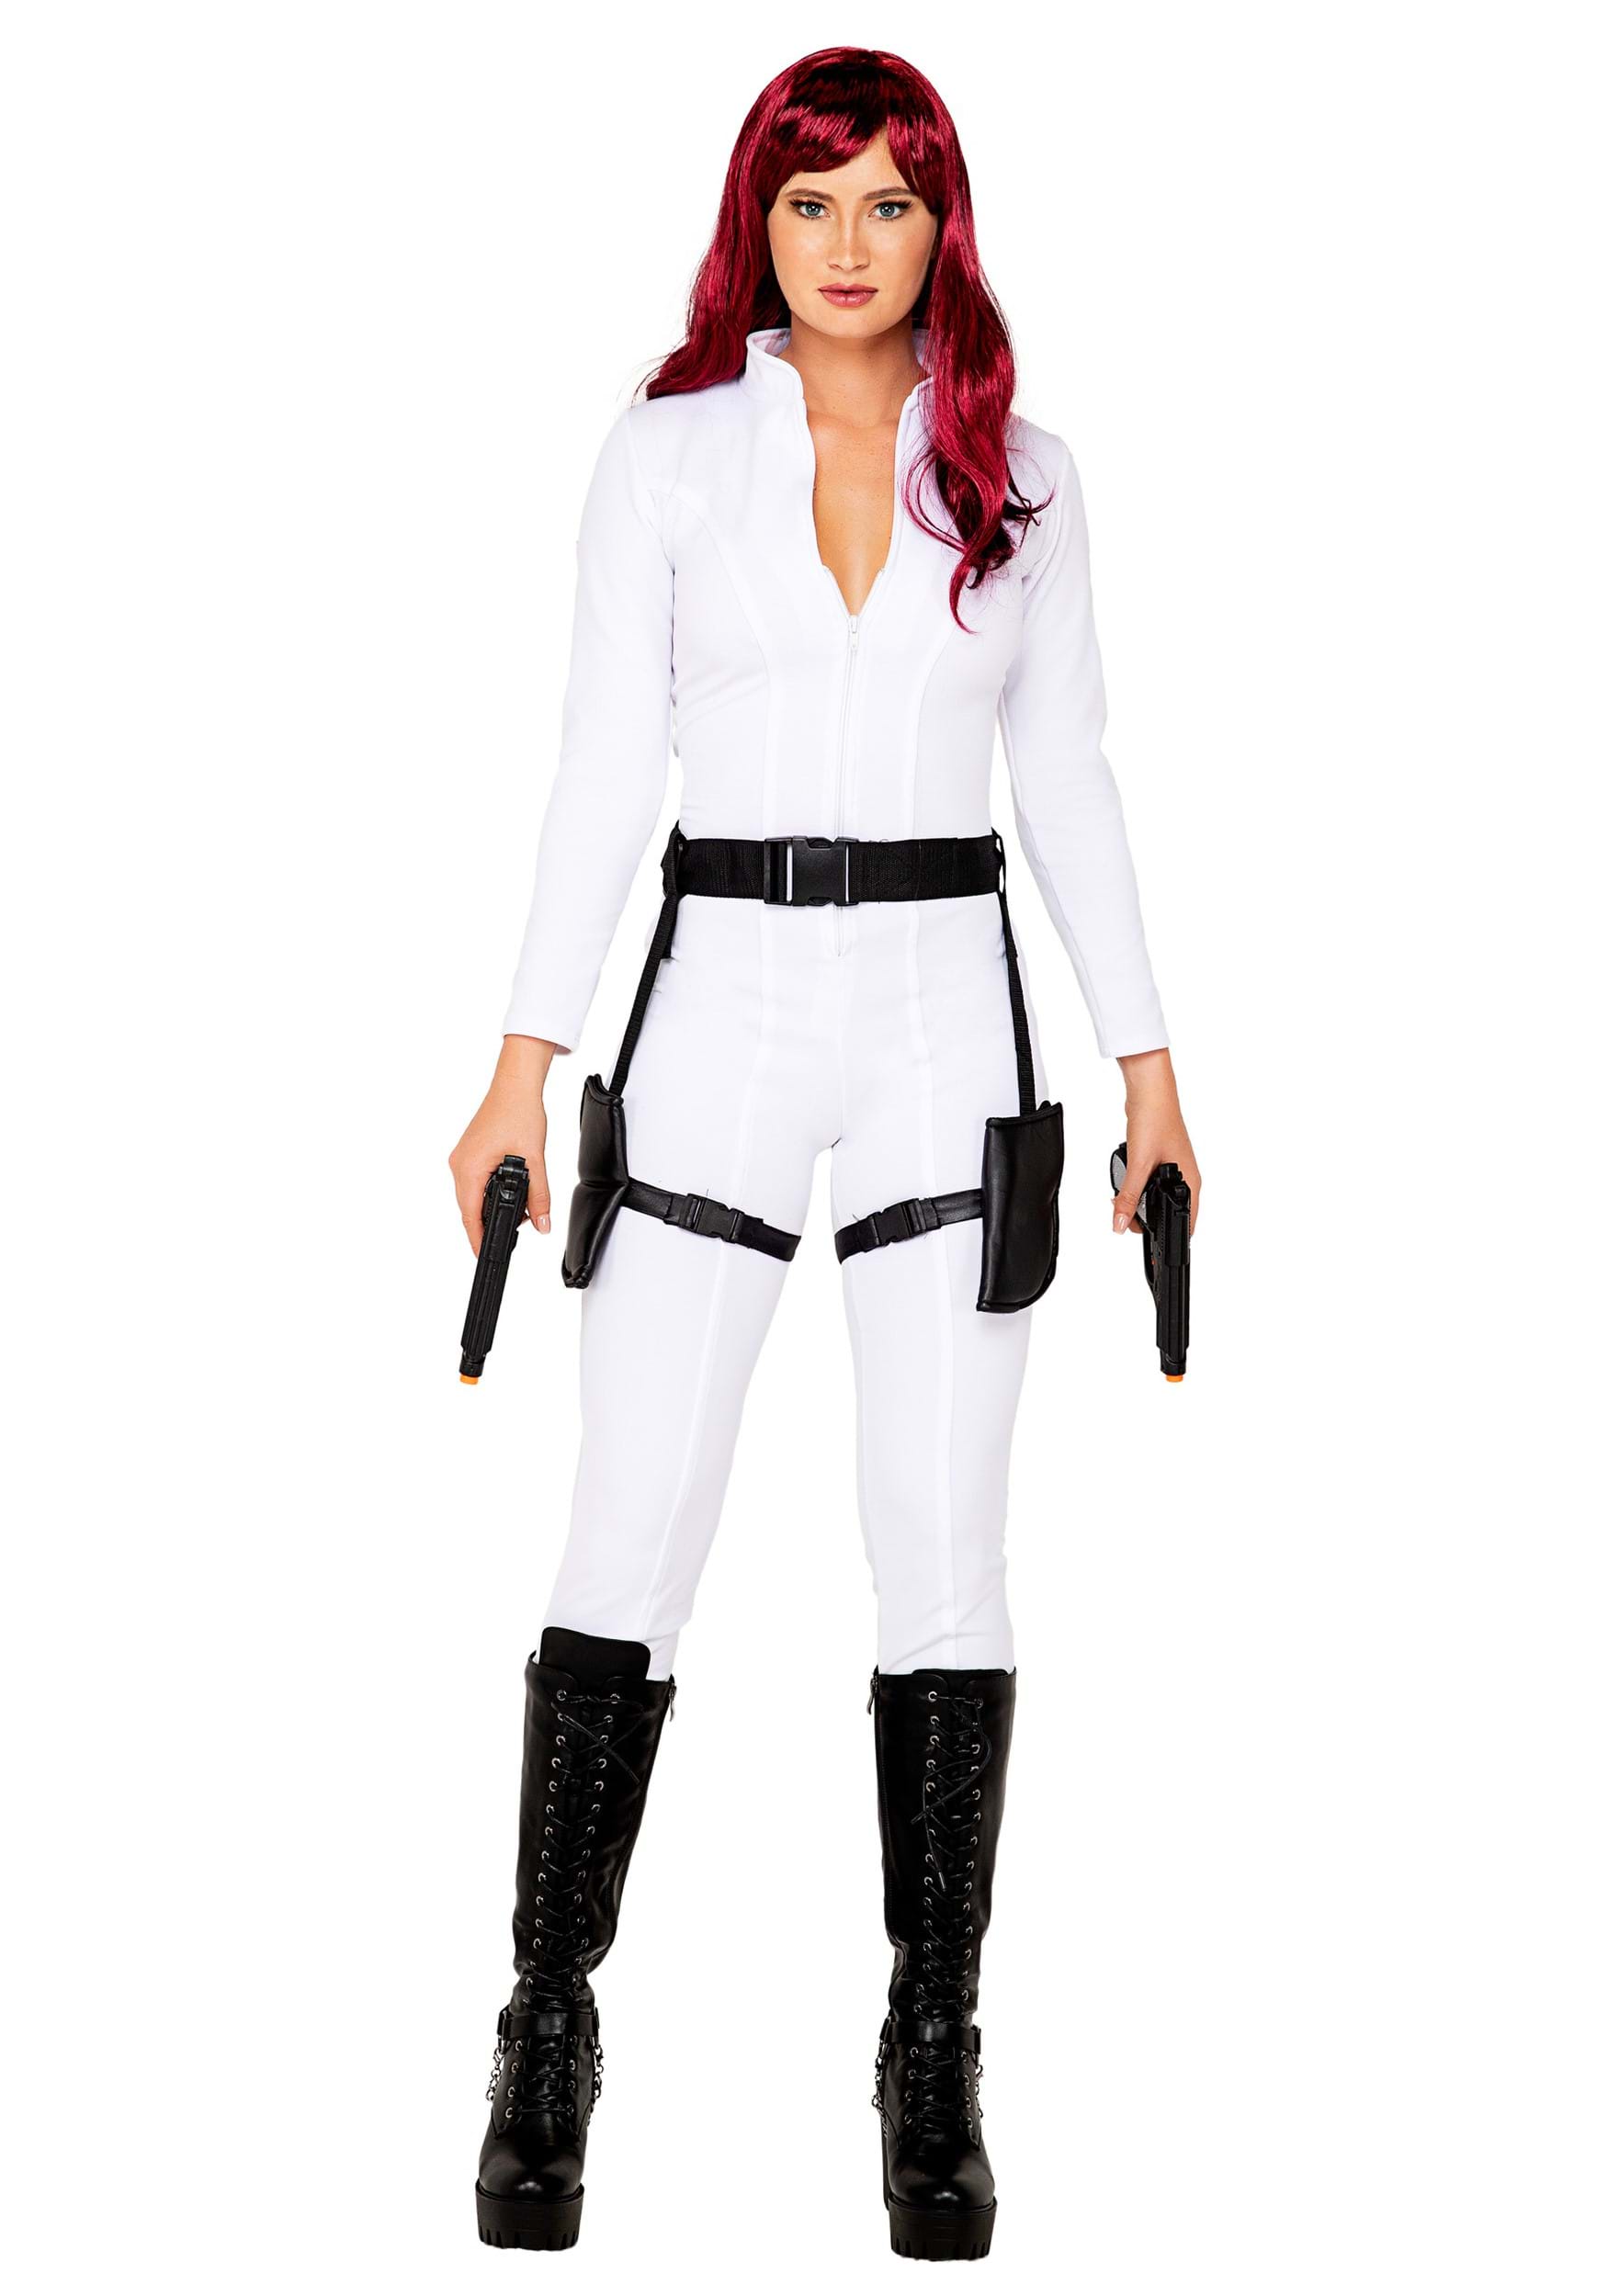 Image of Black Ops Spy Costume for Women ID RO5093-S